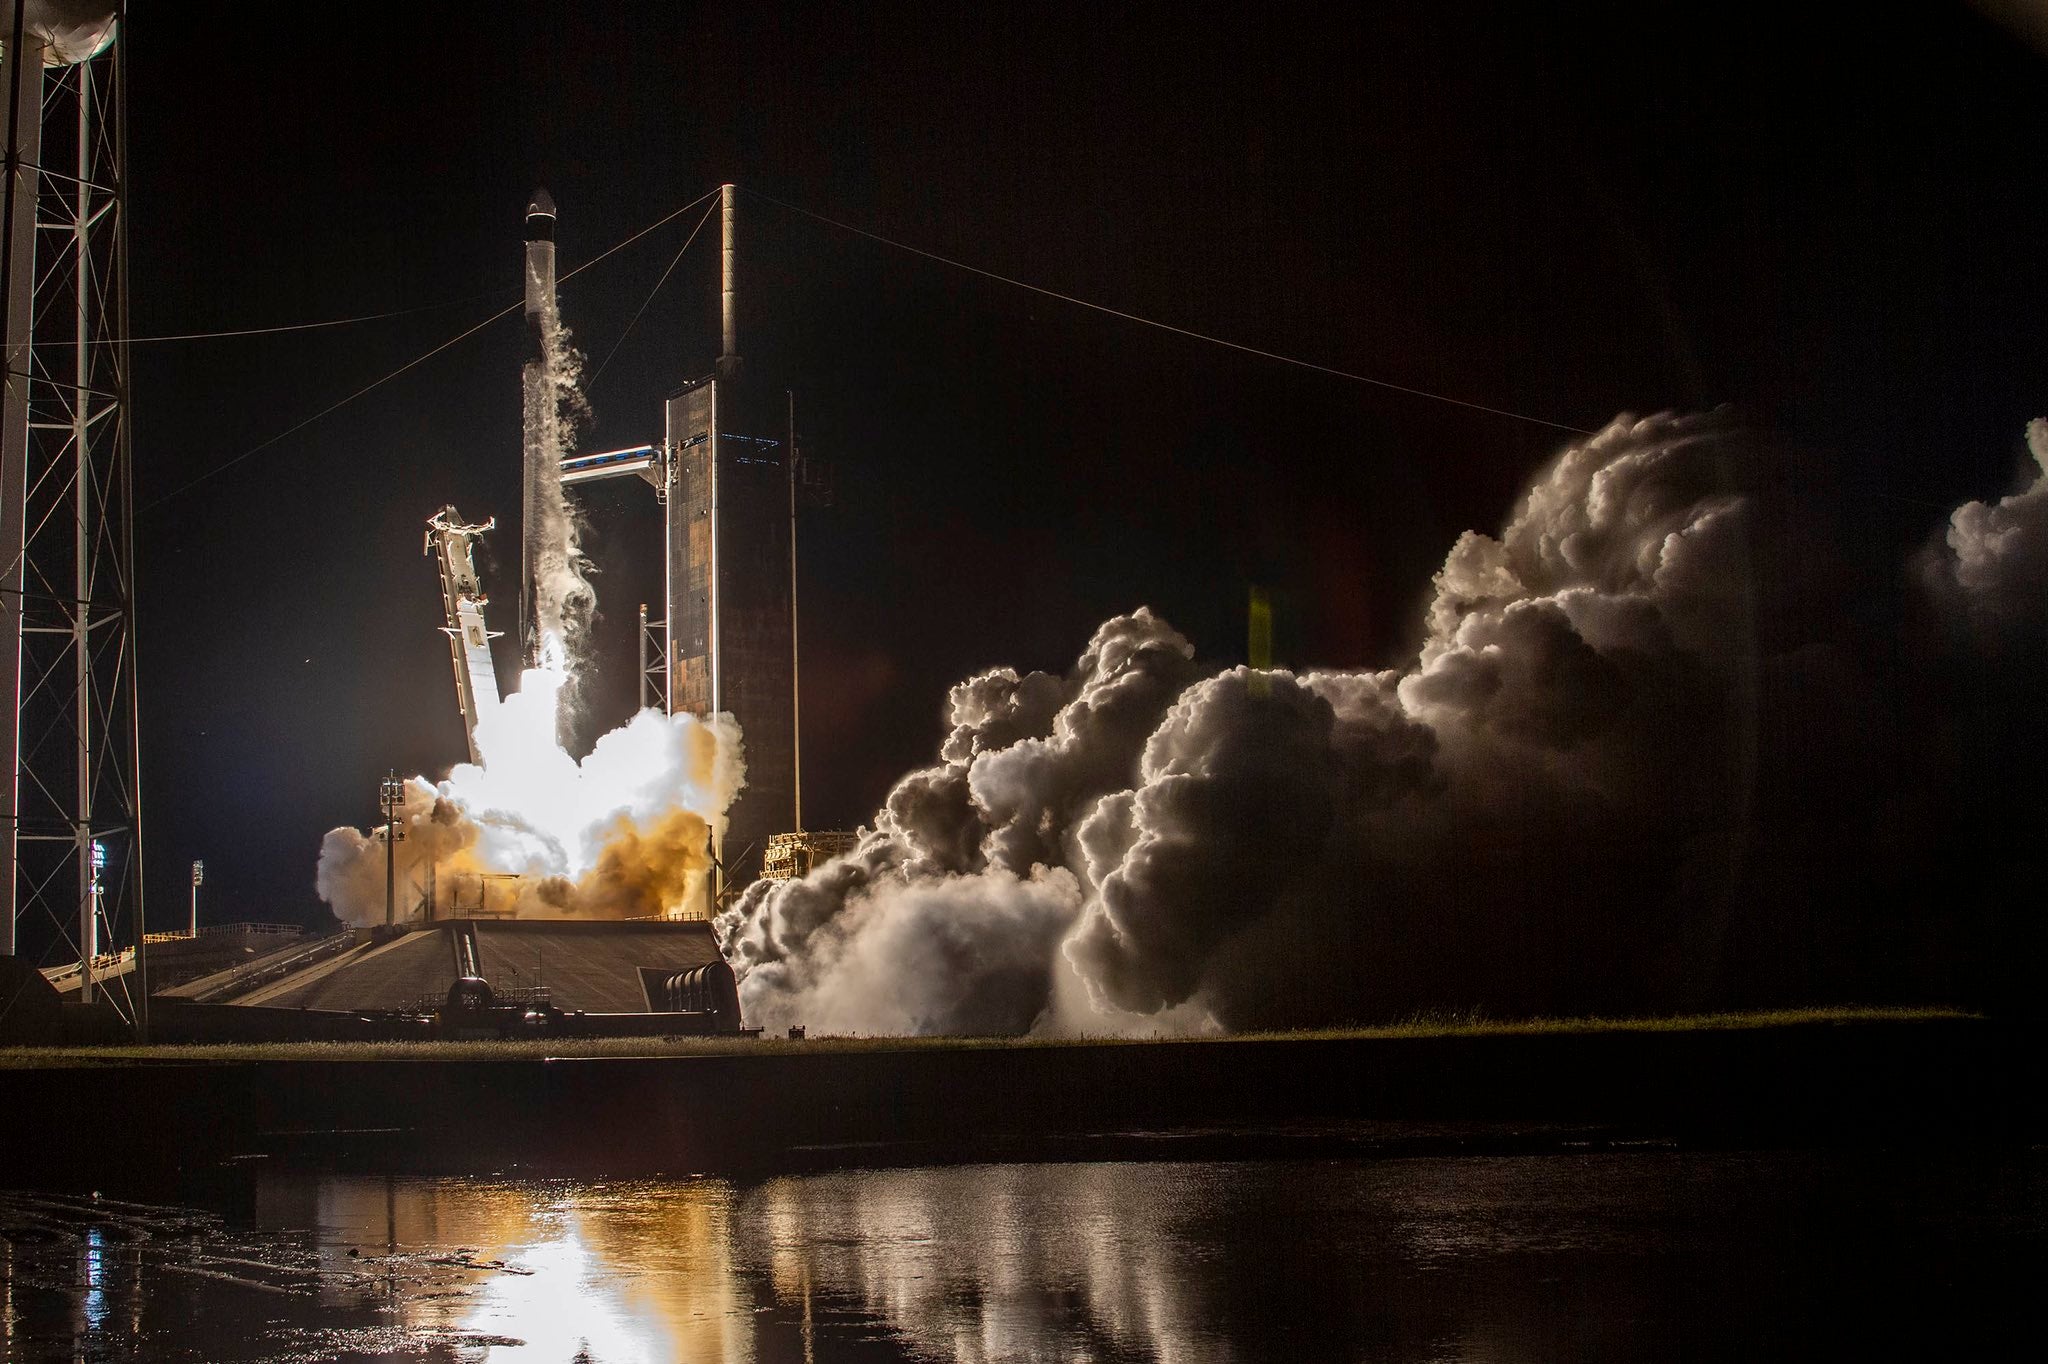 Exolaunch Signs Multi-Launch Contract With SpaceX To Launch Payload Aboard Falcon 9 Rideshare Missions